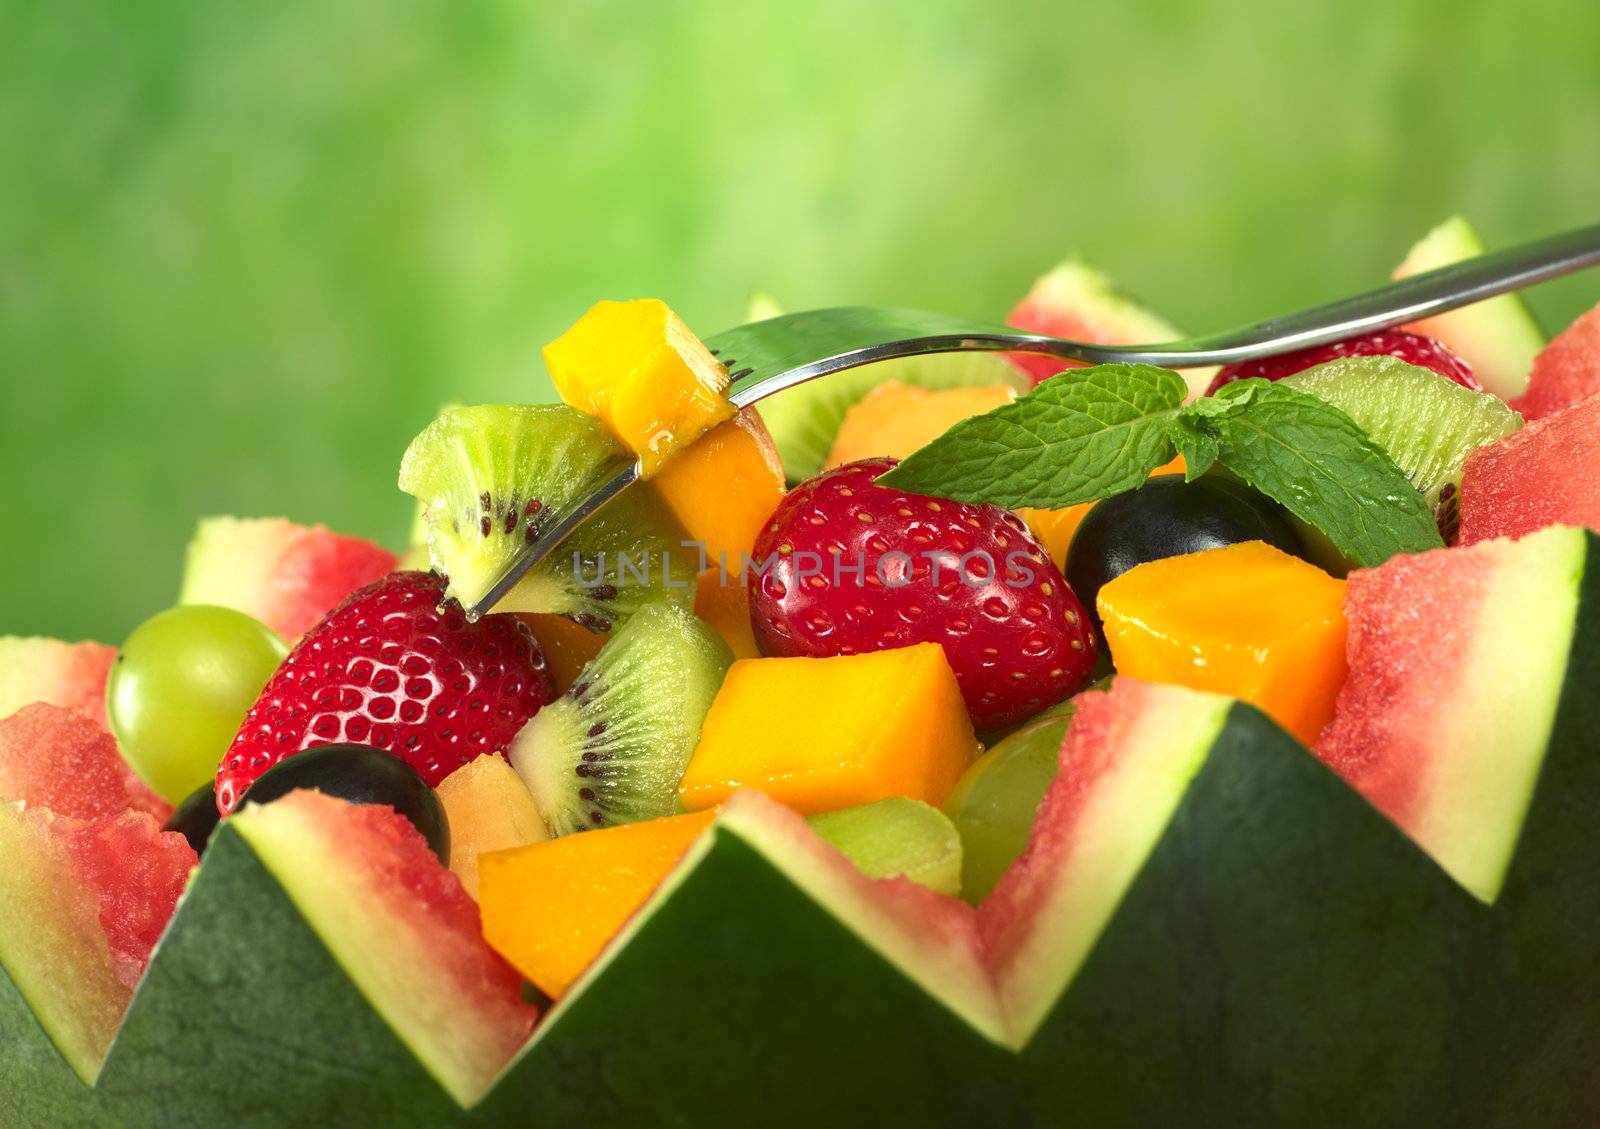 Fresh fruit salad (strawberry, kiwi, mango, grape) in melon bowl with kiwi and mango on fork and a mint leaf as garnish in front of green background (Selective Focus, Focus on the fruit on the fork and the mint leaf)